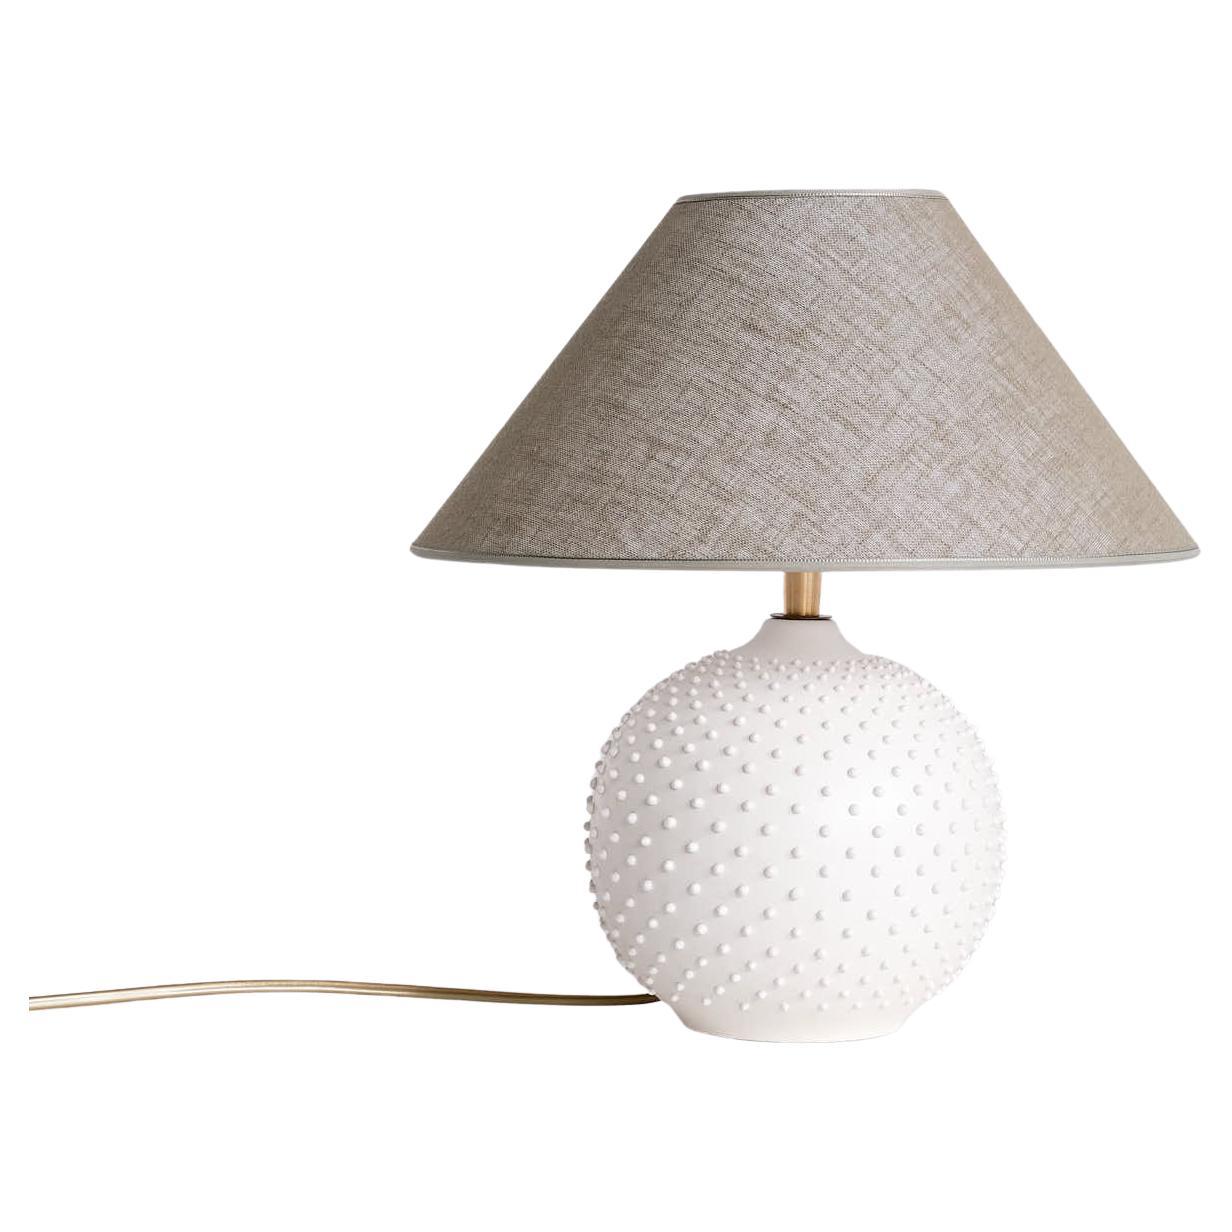 This elegant table lamp was designed by Alvino Bagni and produced by his company Bagni in Italy in the 1970s. The complex manufacturing involved the application of each “dot” by hand, individually, after marking the design directly on the piece.